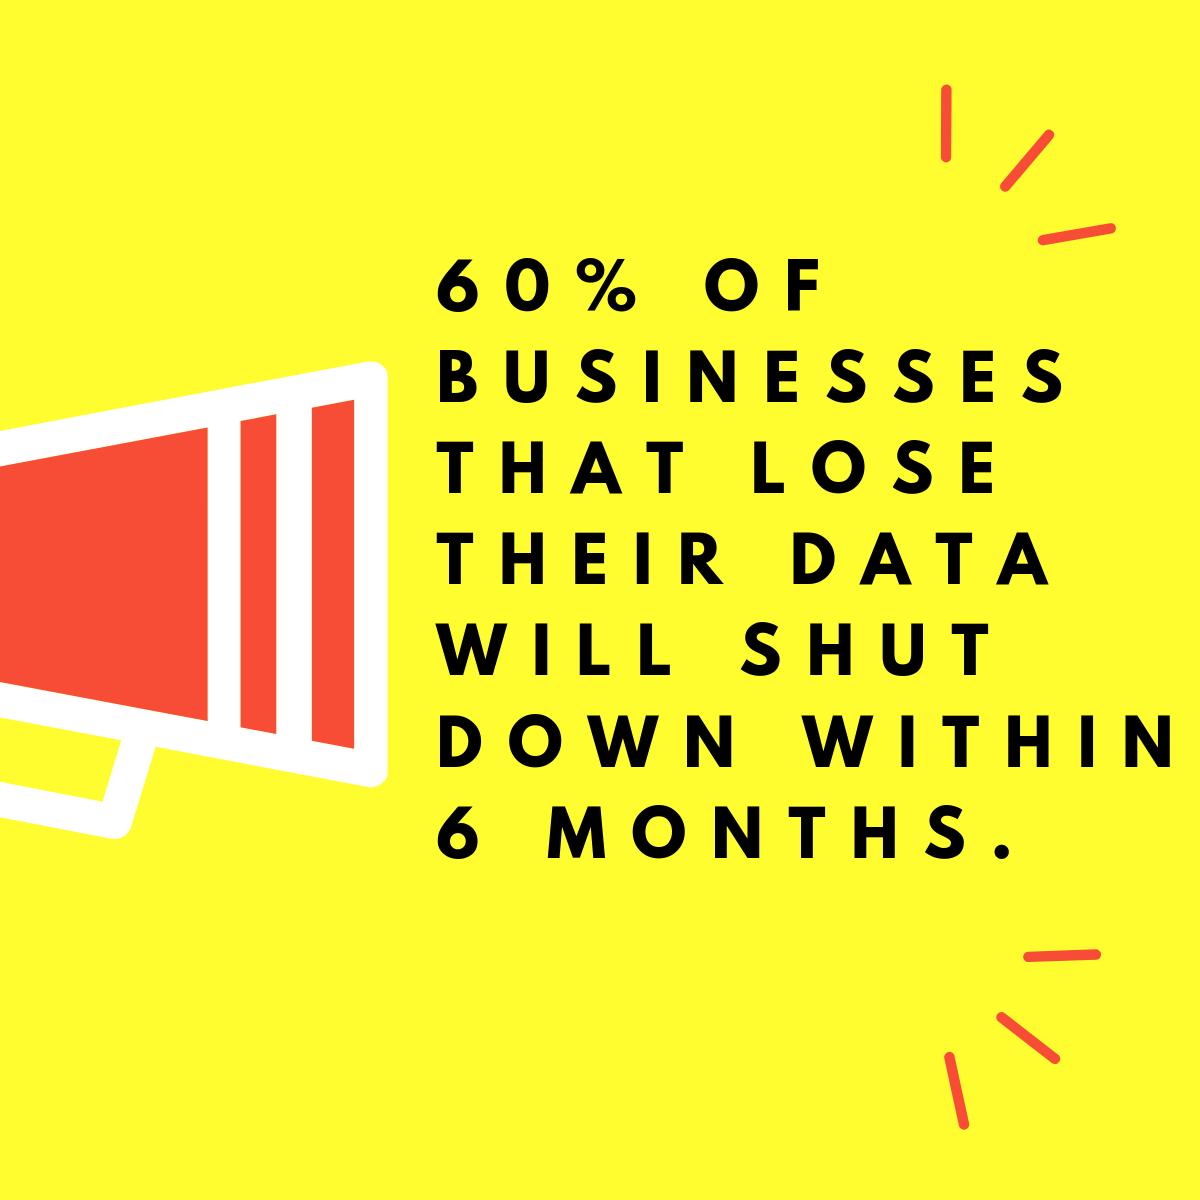 60% of businesses that lose their data will shut down within 6 months.